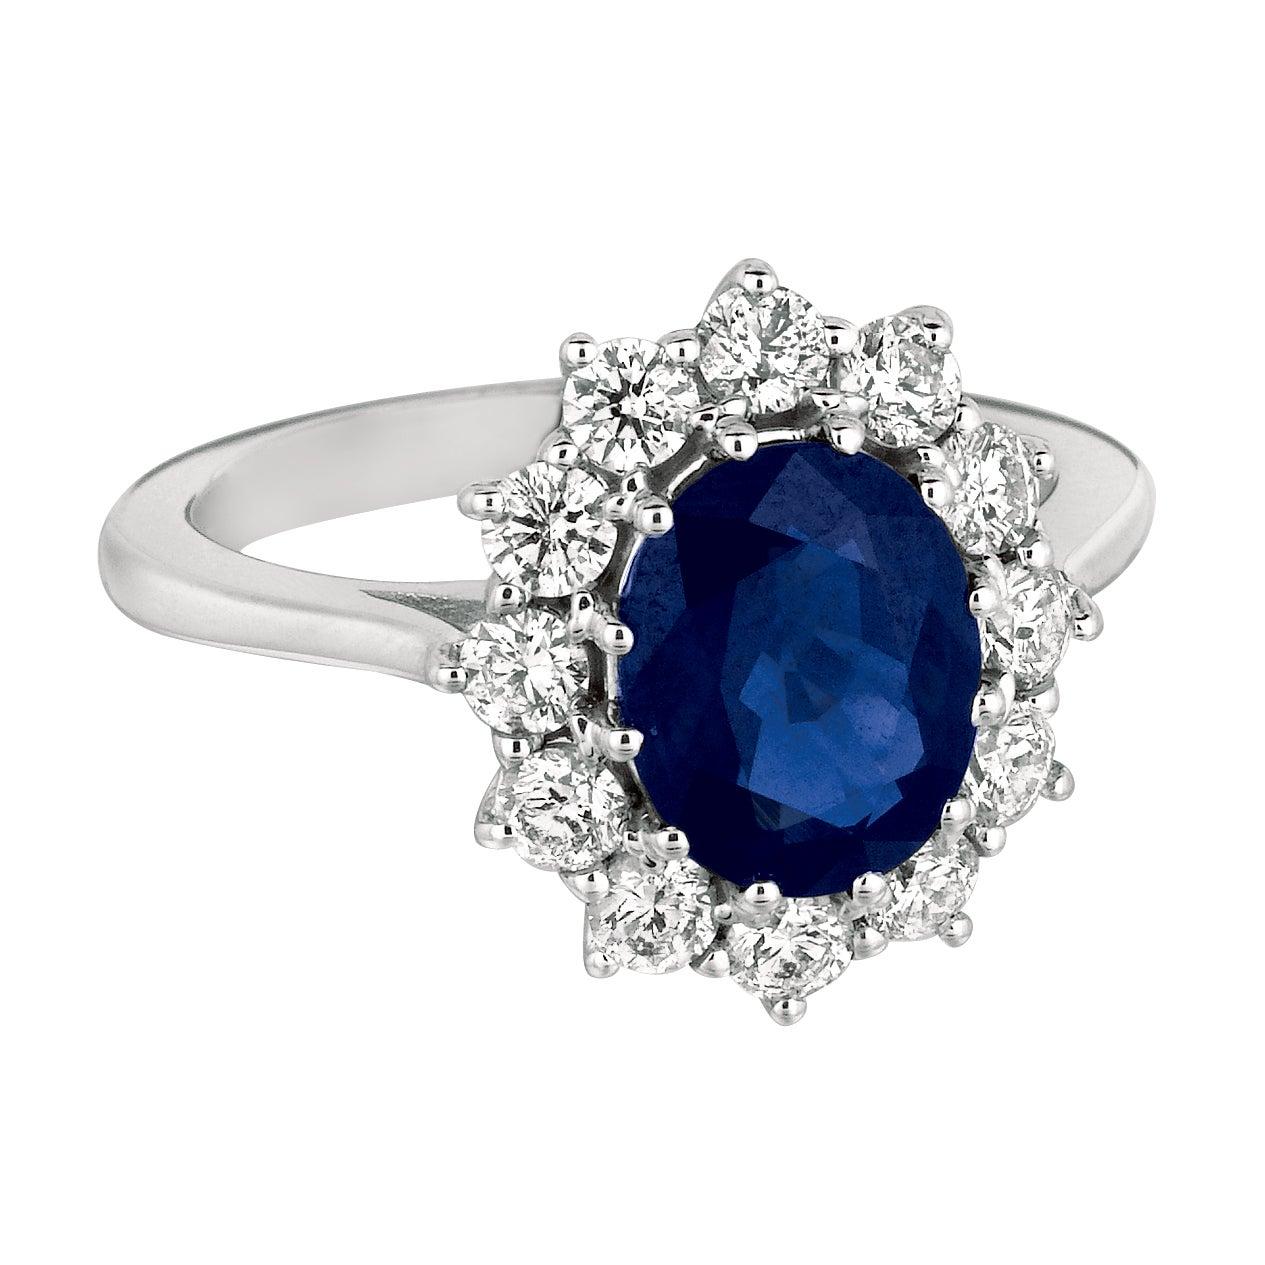 For Sale:  Princess Diana Inspired 3.55 Carat Oval Sapphire and Diamond Ring 14k White Gold 2